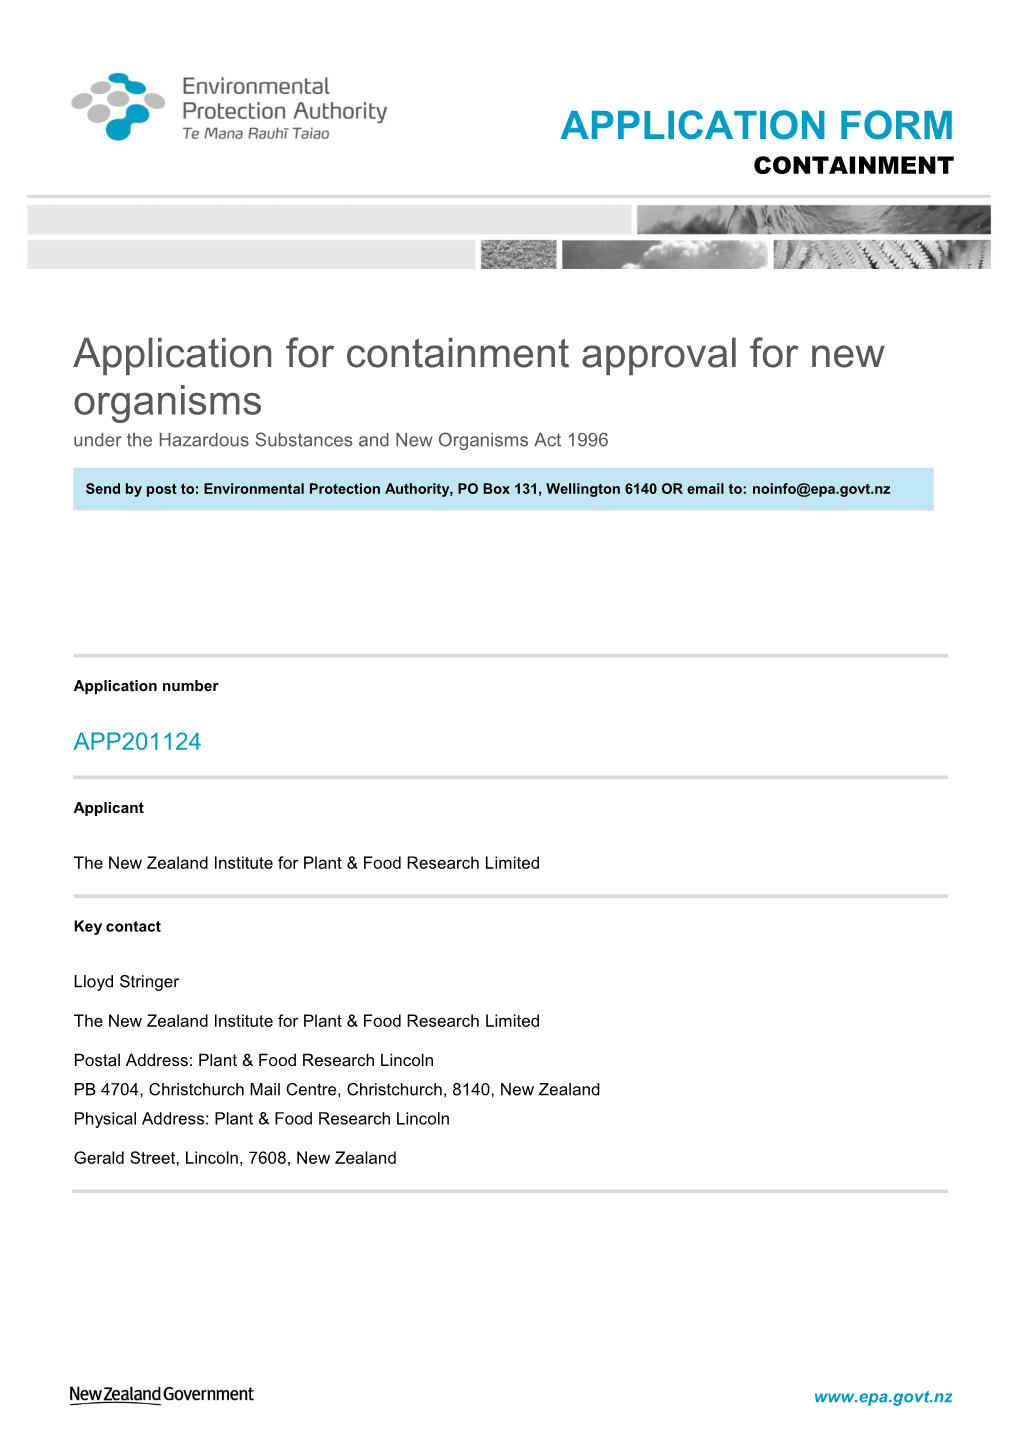 Application Form for the Containment of New Organisms